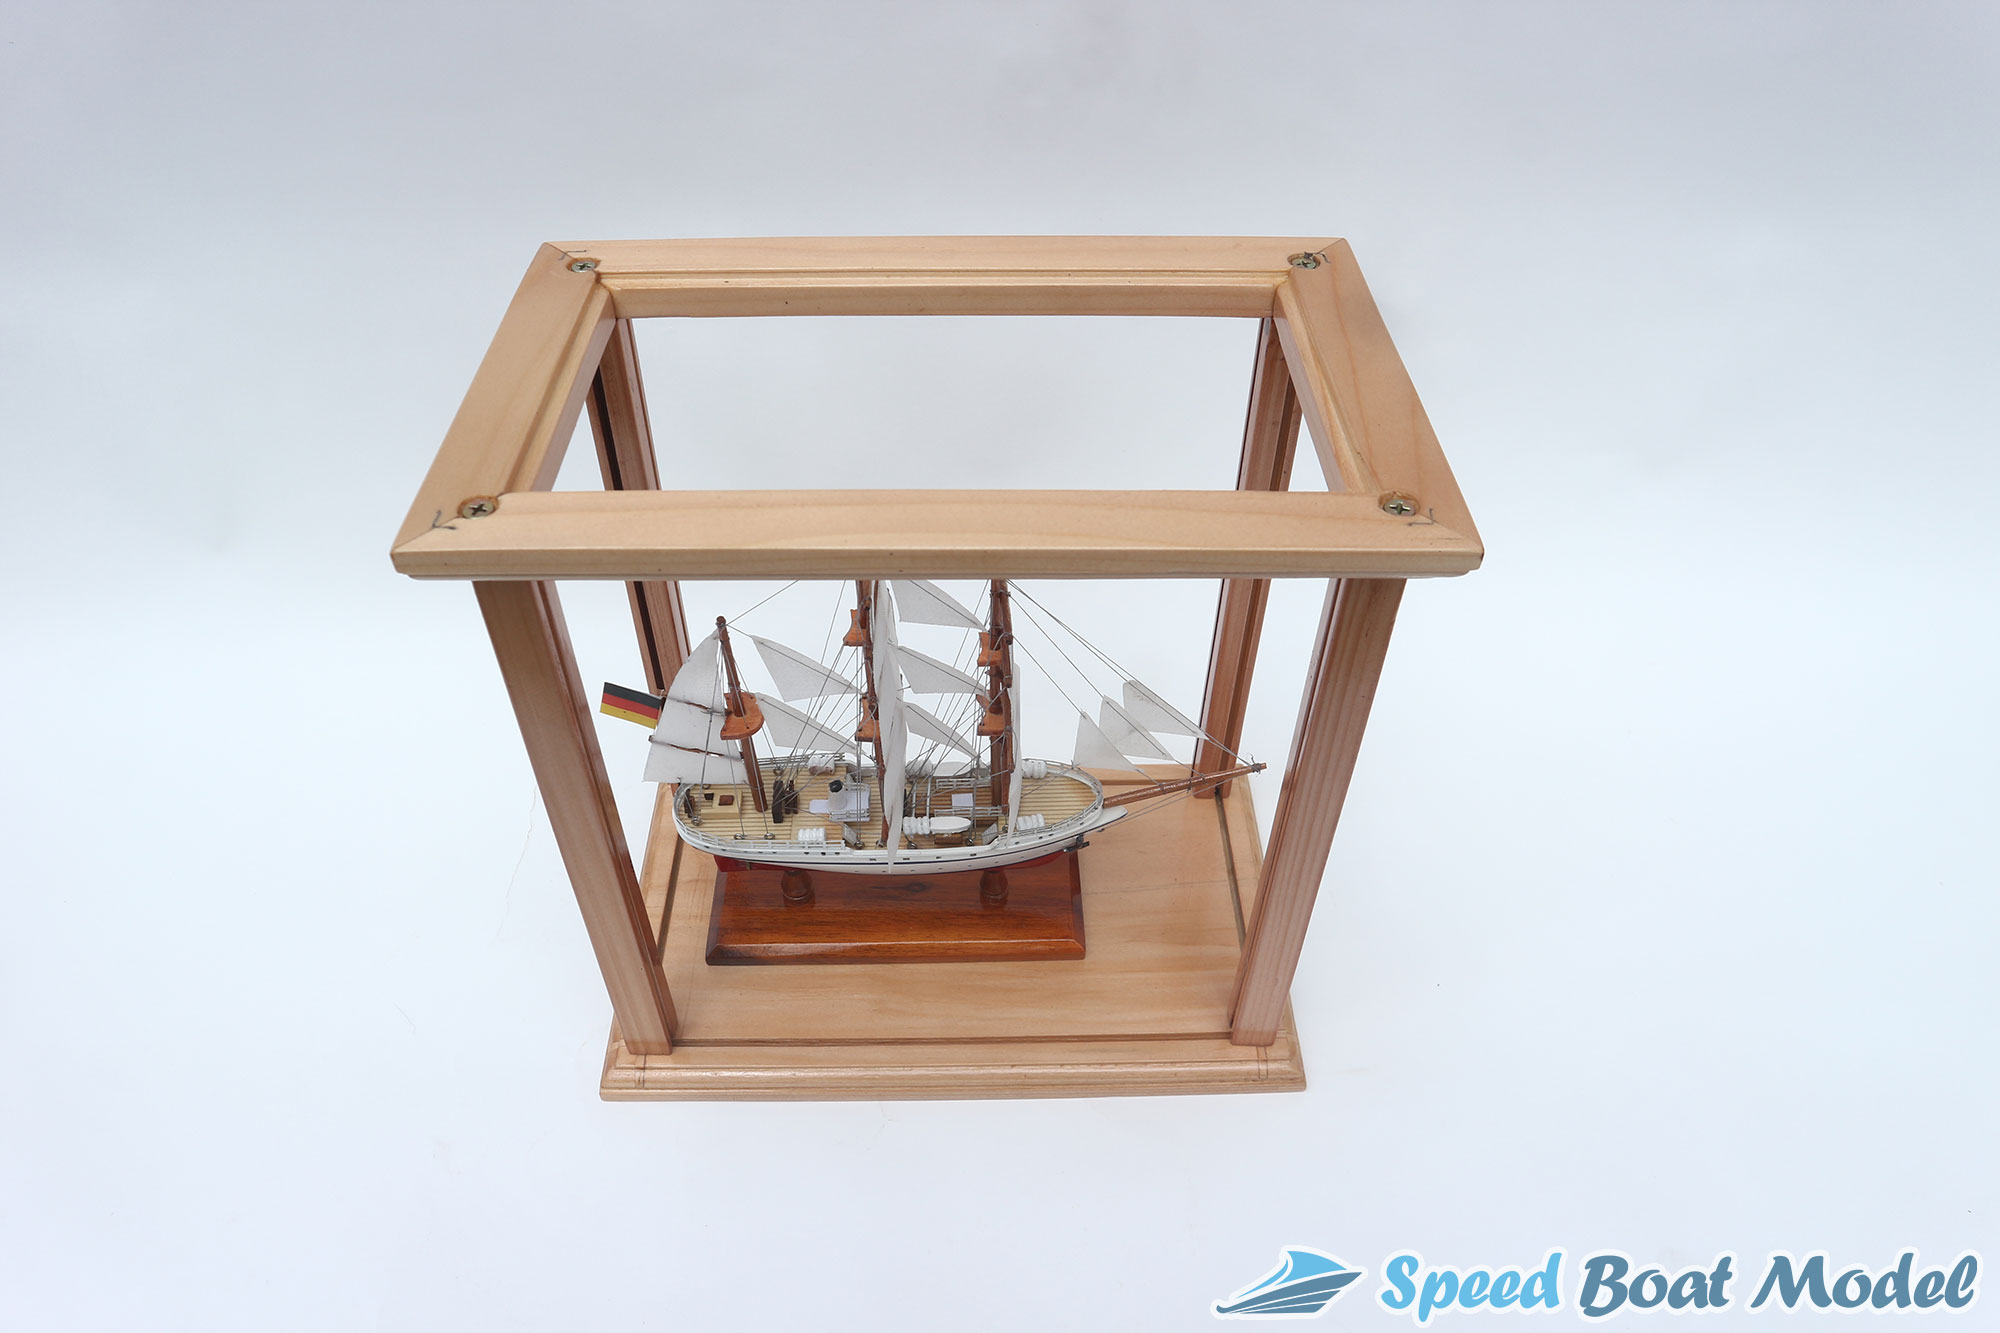 Display Case With Gorch Fock II Tall Ship Model